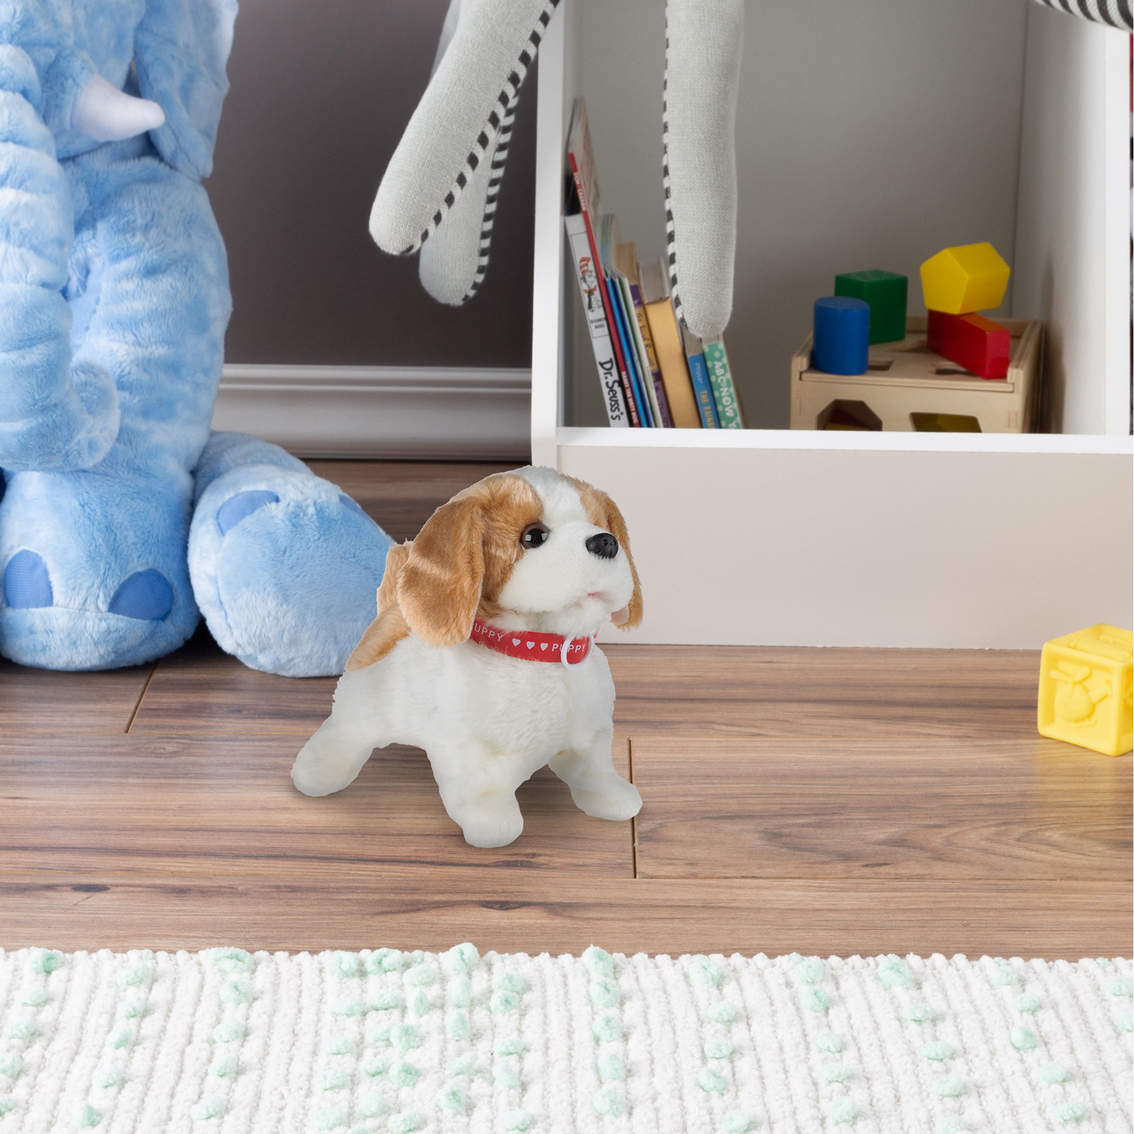 Happy Trails Interactive Plush Puppy Toy - Image 8 of 8